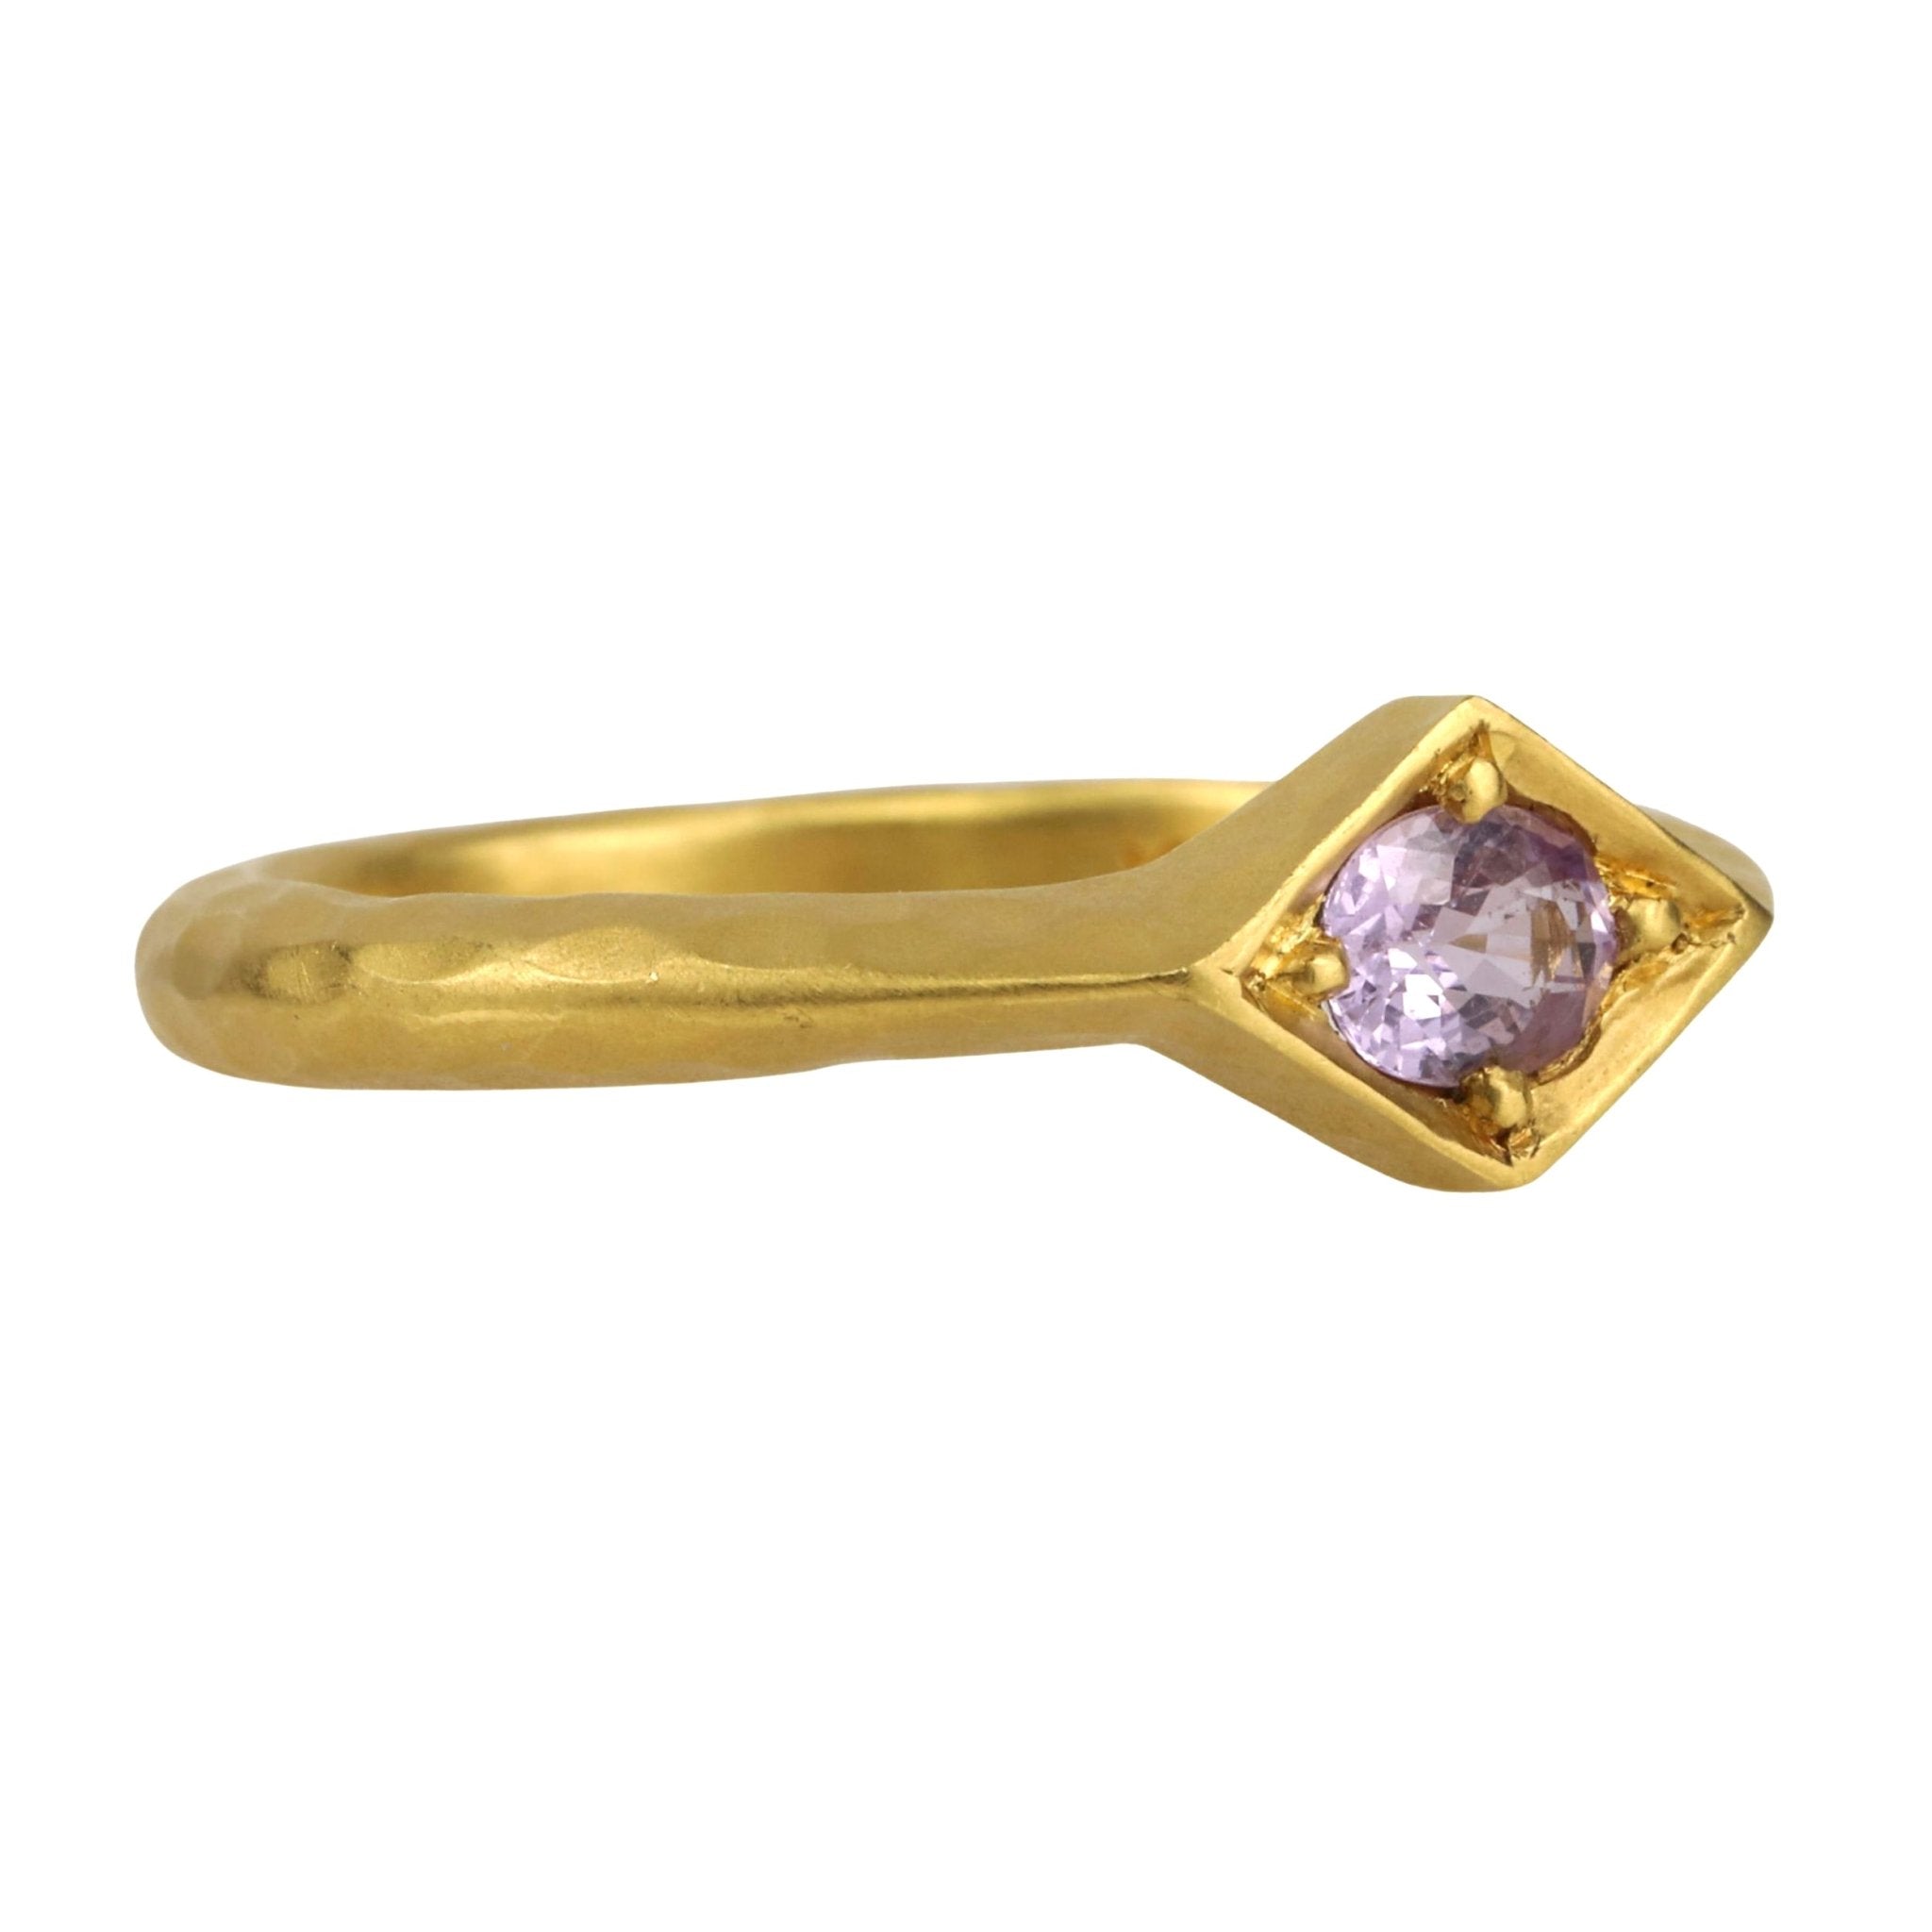 Cathy Waterman 22K Gold Hammered Kite-Shaped Ring with Oval Pink Sapphire Center